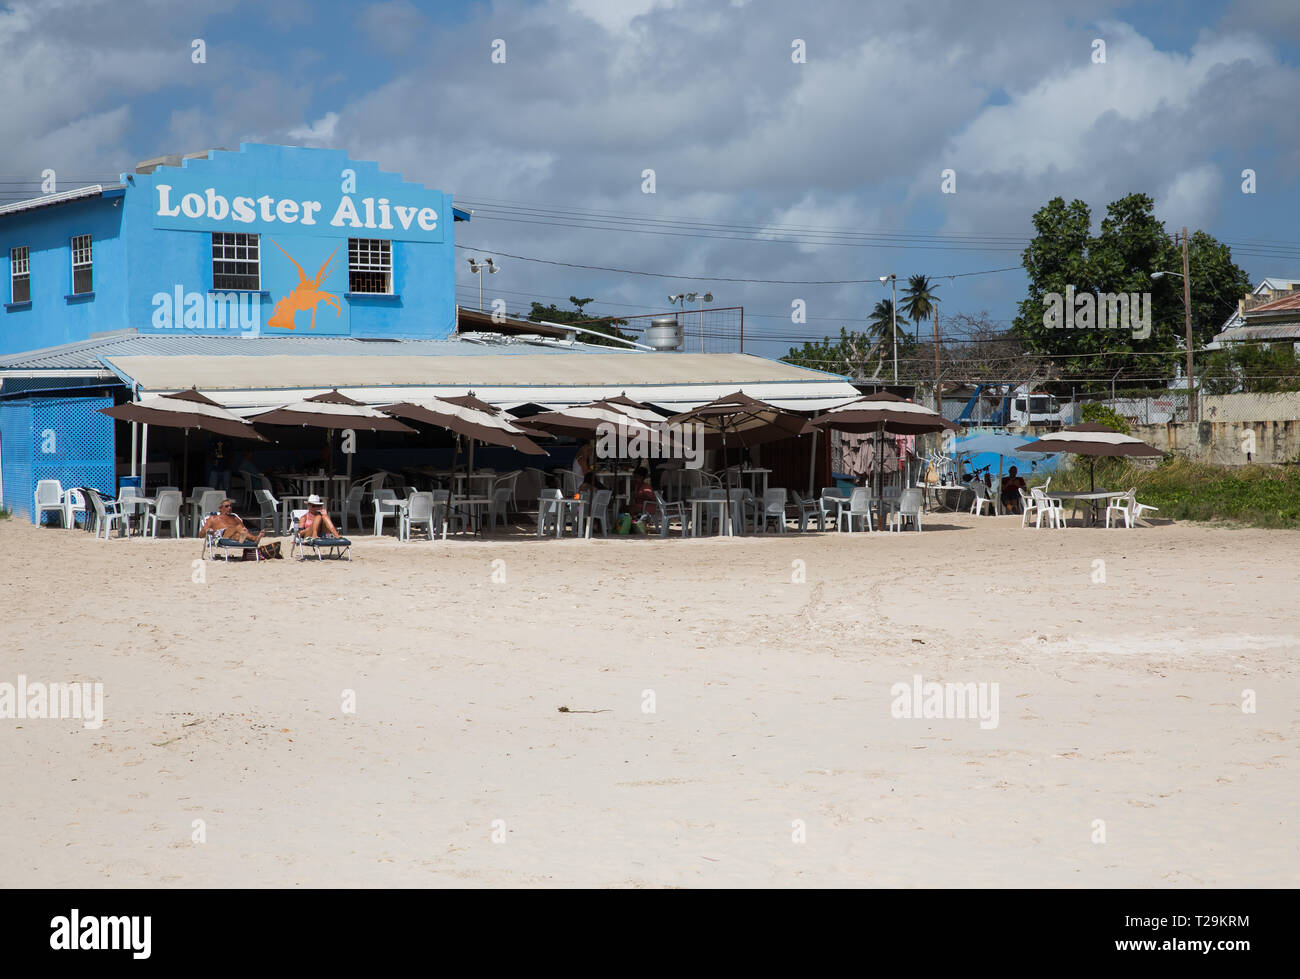 Lobster Alive restaurant by the beach in Bridgetown, Barbados Stock Photo